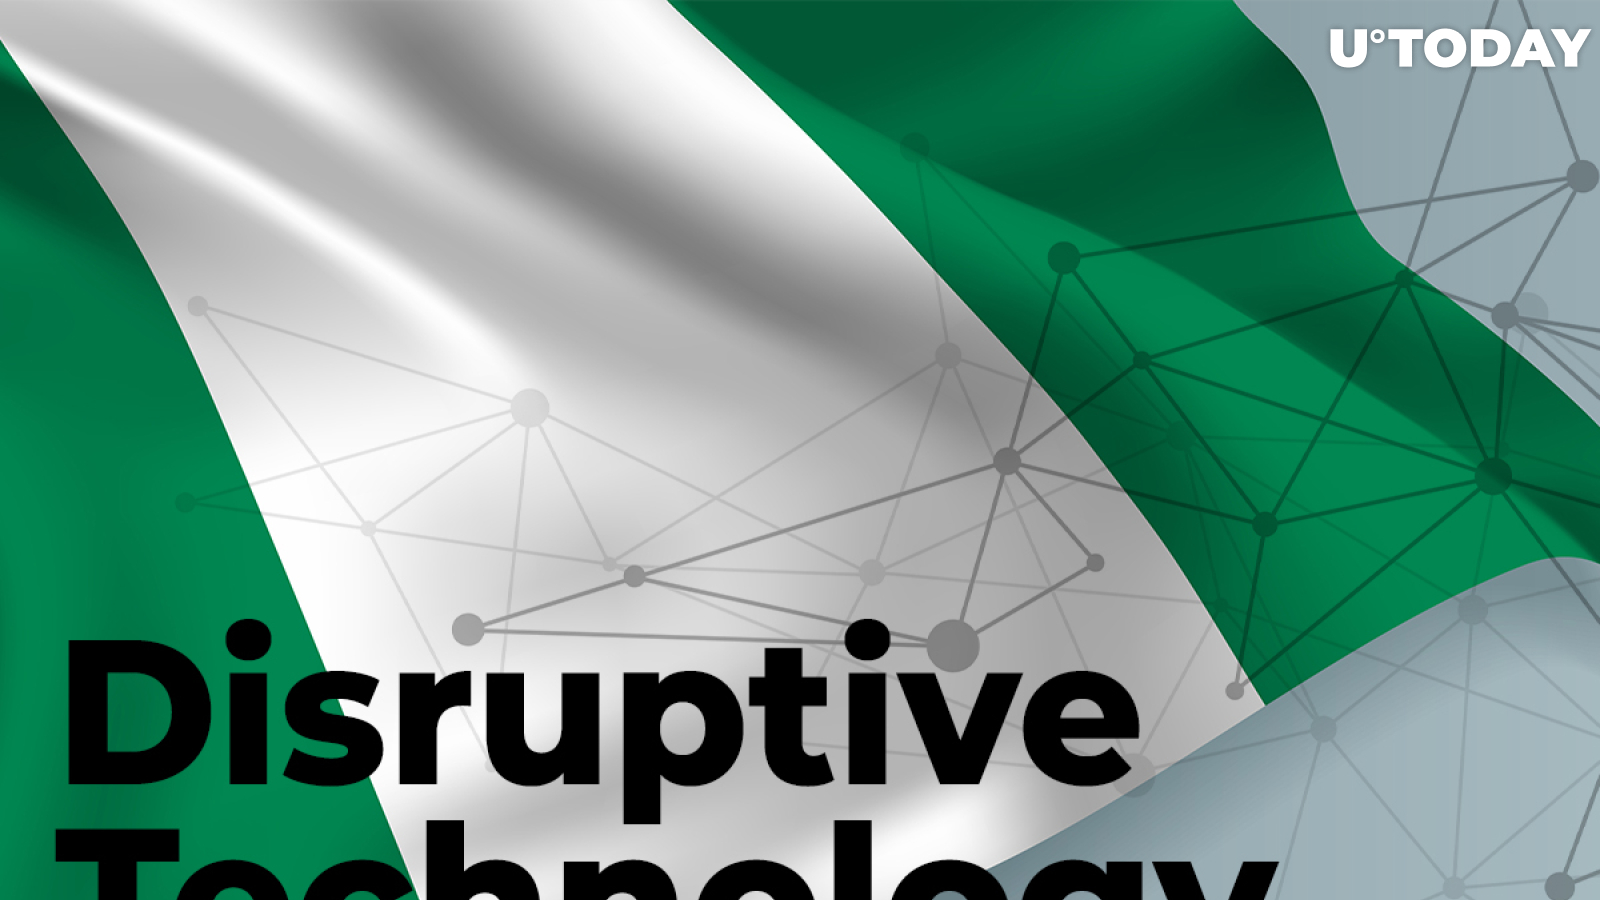 The Nigerian Minister of Communications and Digital Economy Called Blockchain a "Disruptive Technology"